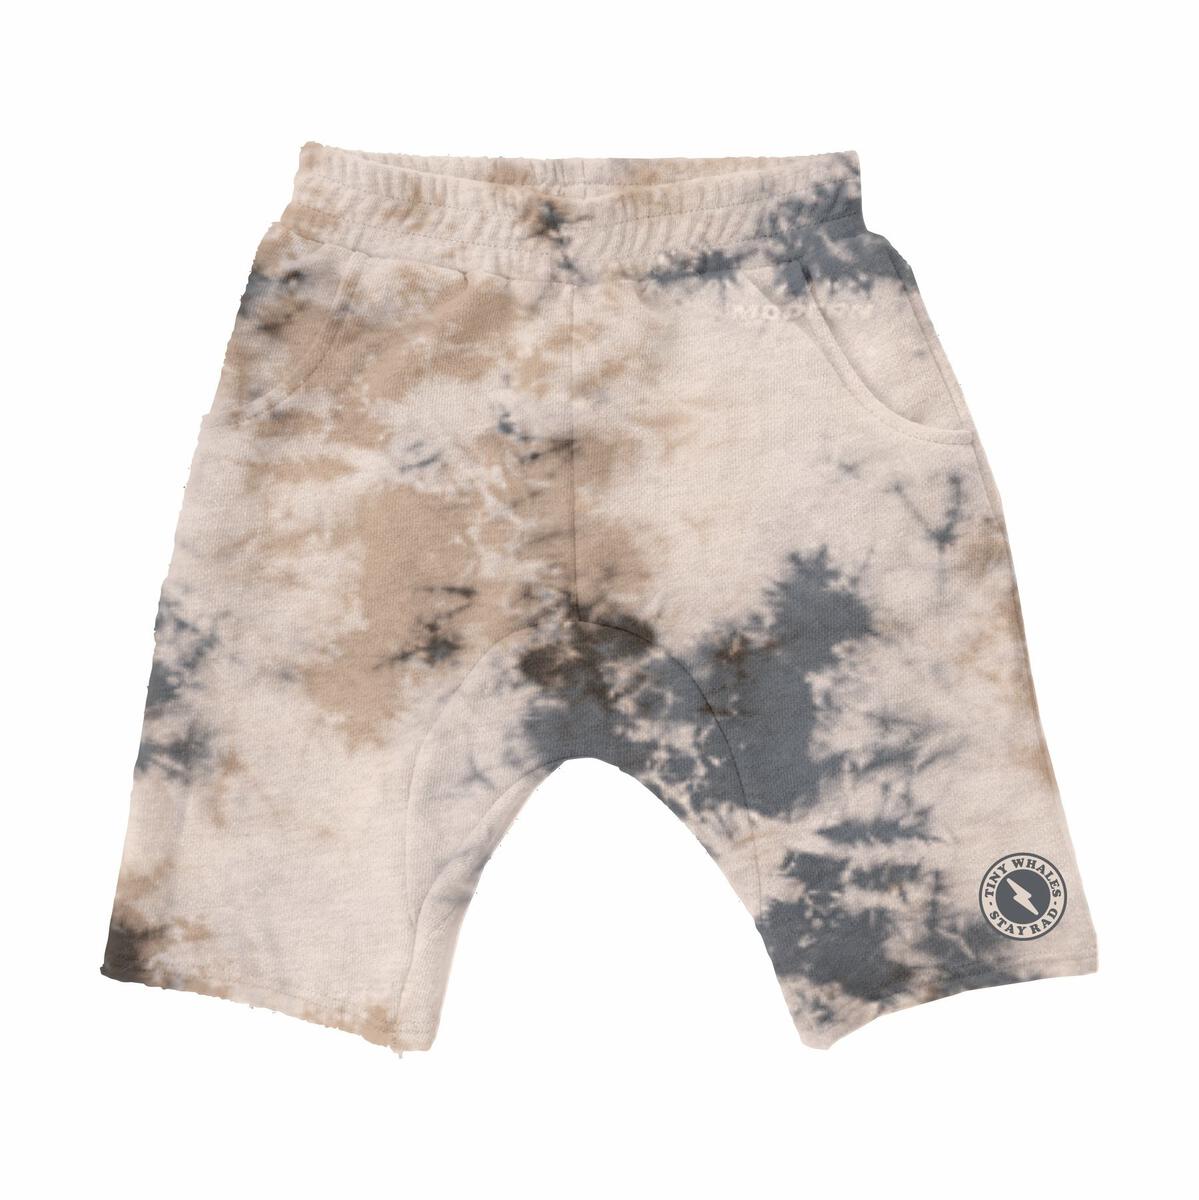 Tiny Whales No Problemo Cozy Boys Shorts - Twinkle Twinkle Little One